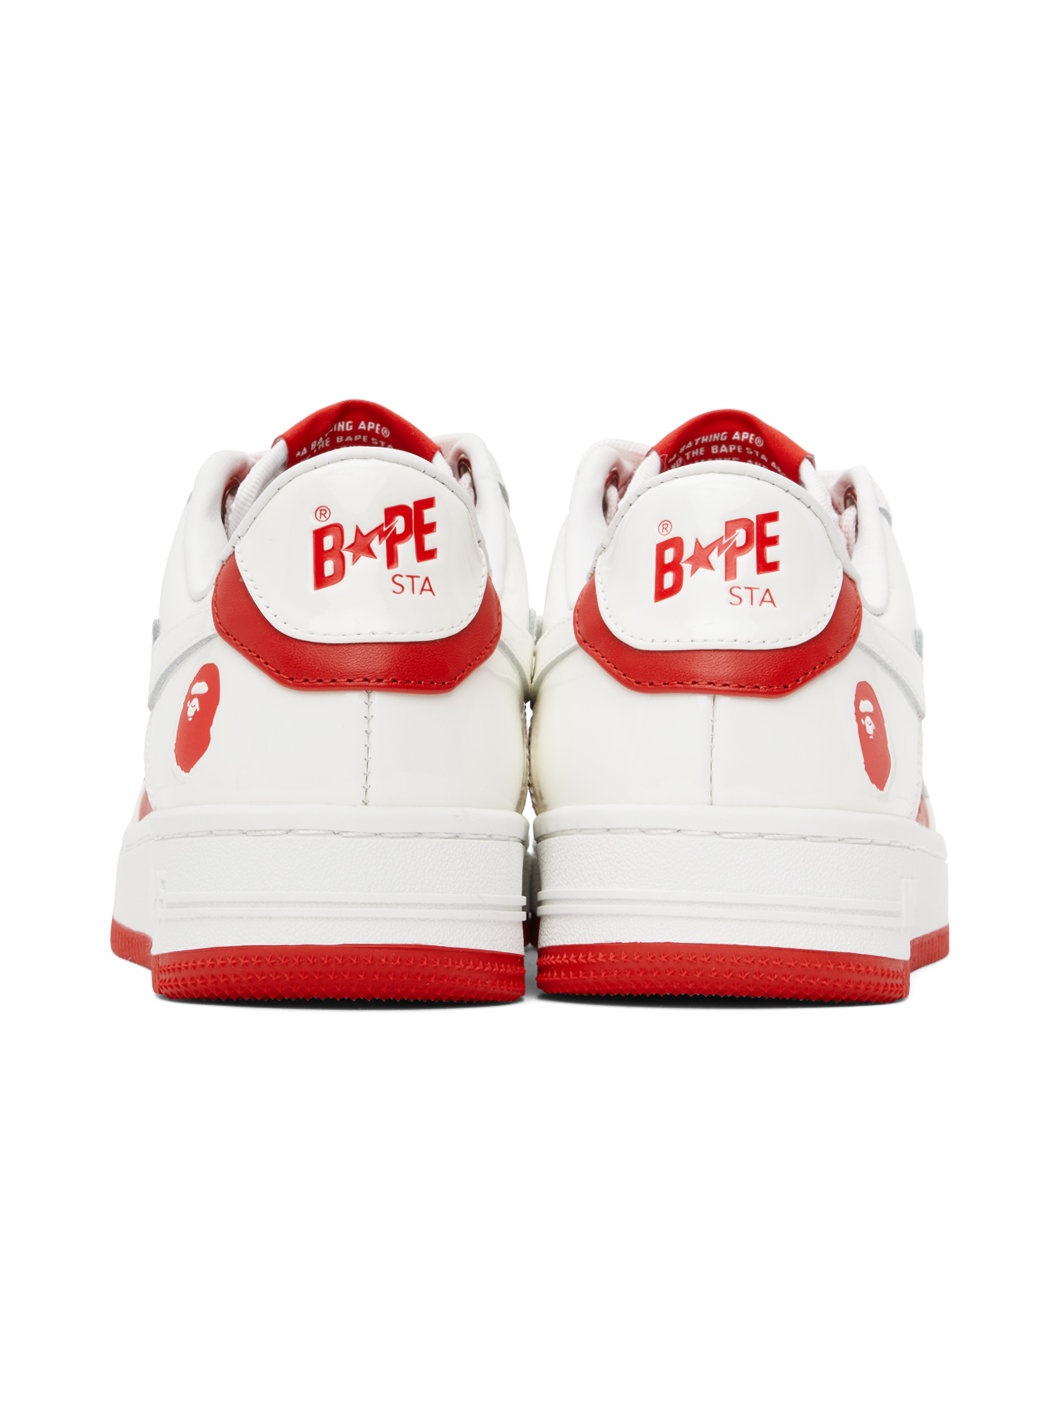 White & Red STA #6 Sneakers - 2